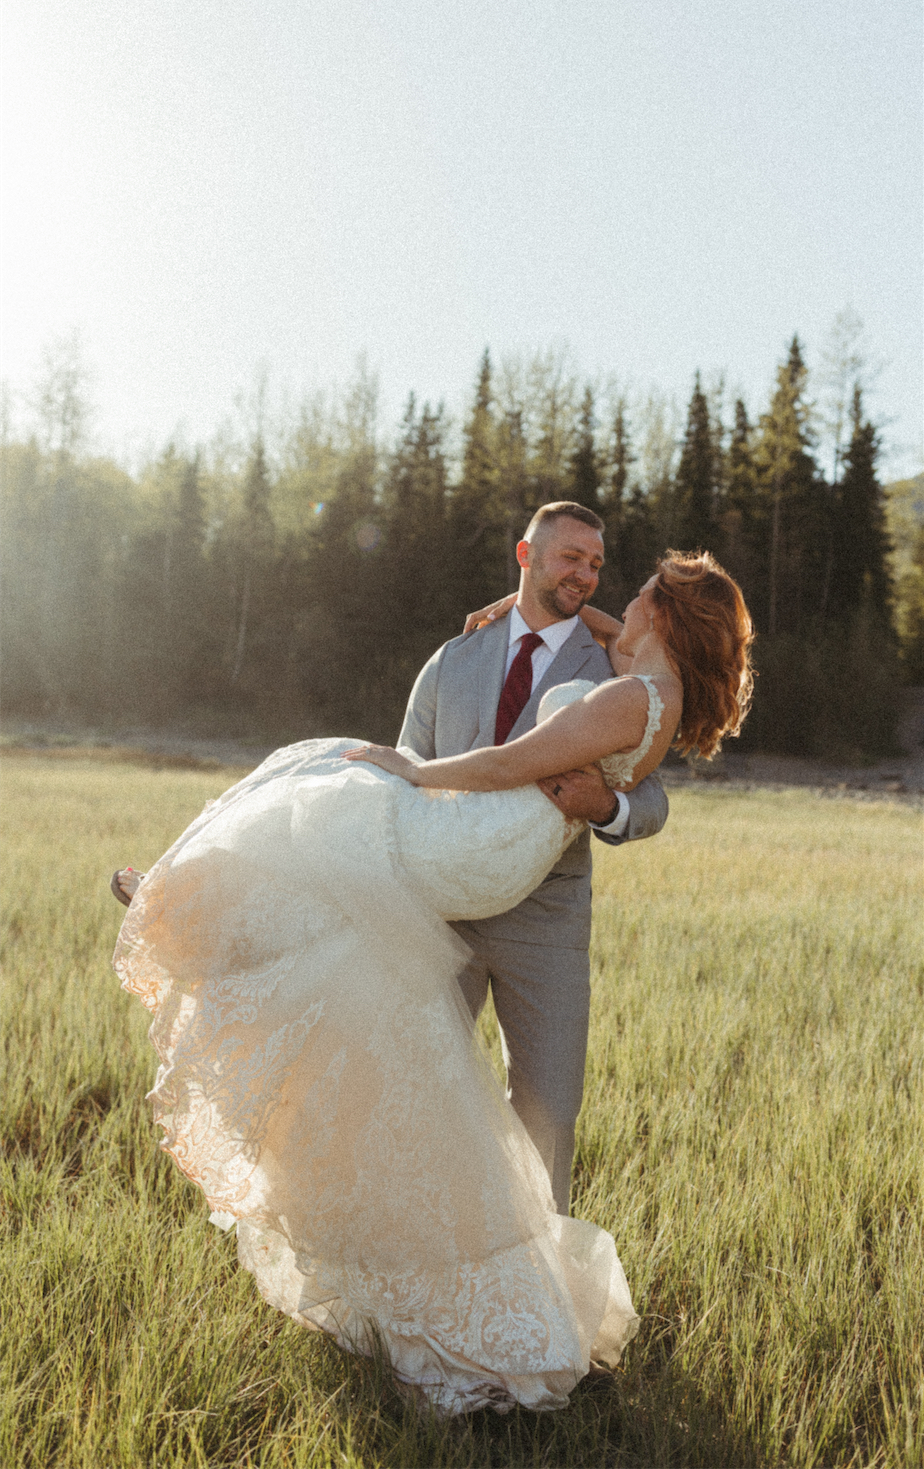 Groom carrying bride during their anniversary photos in Alaska 